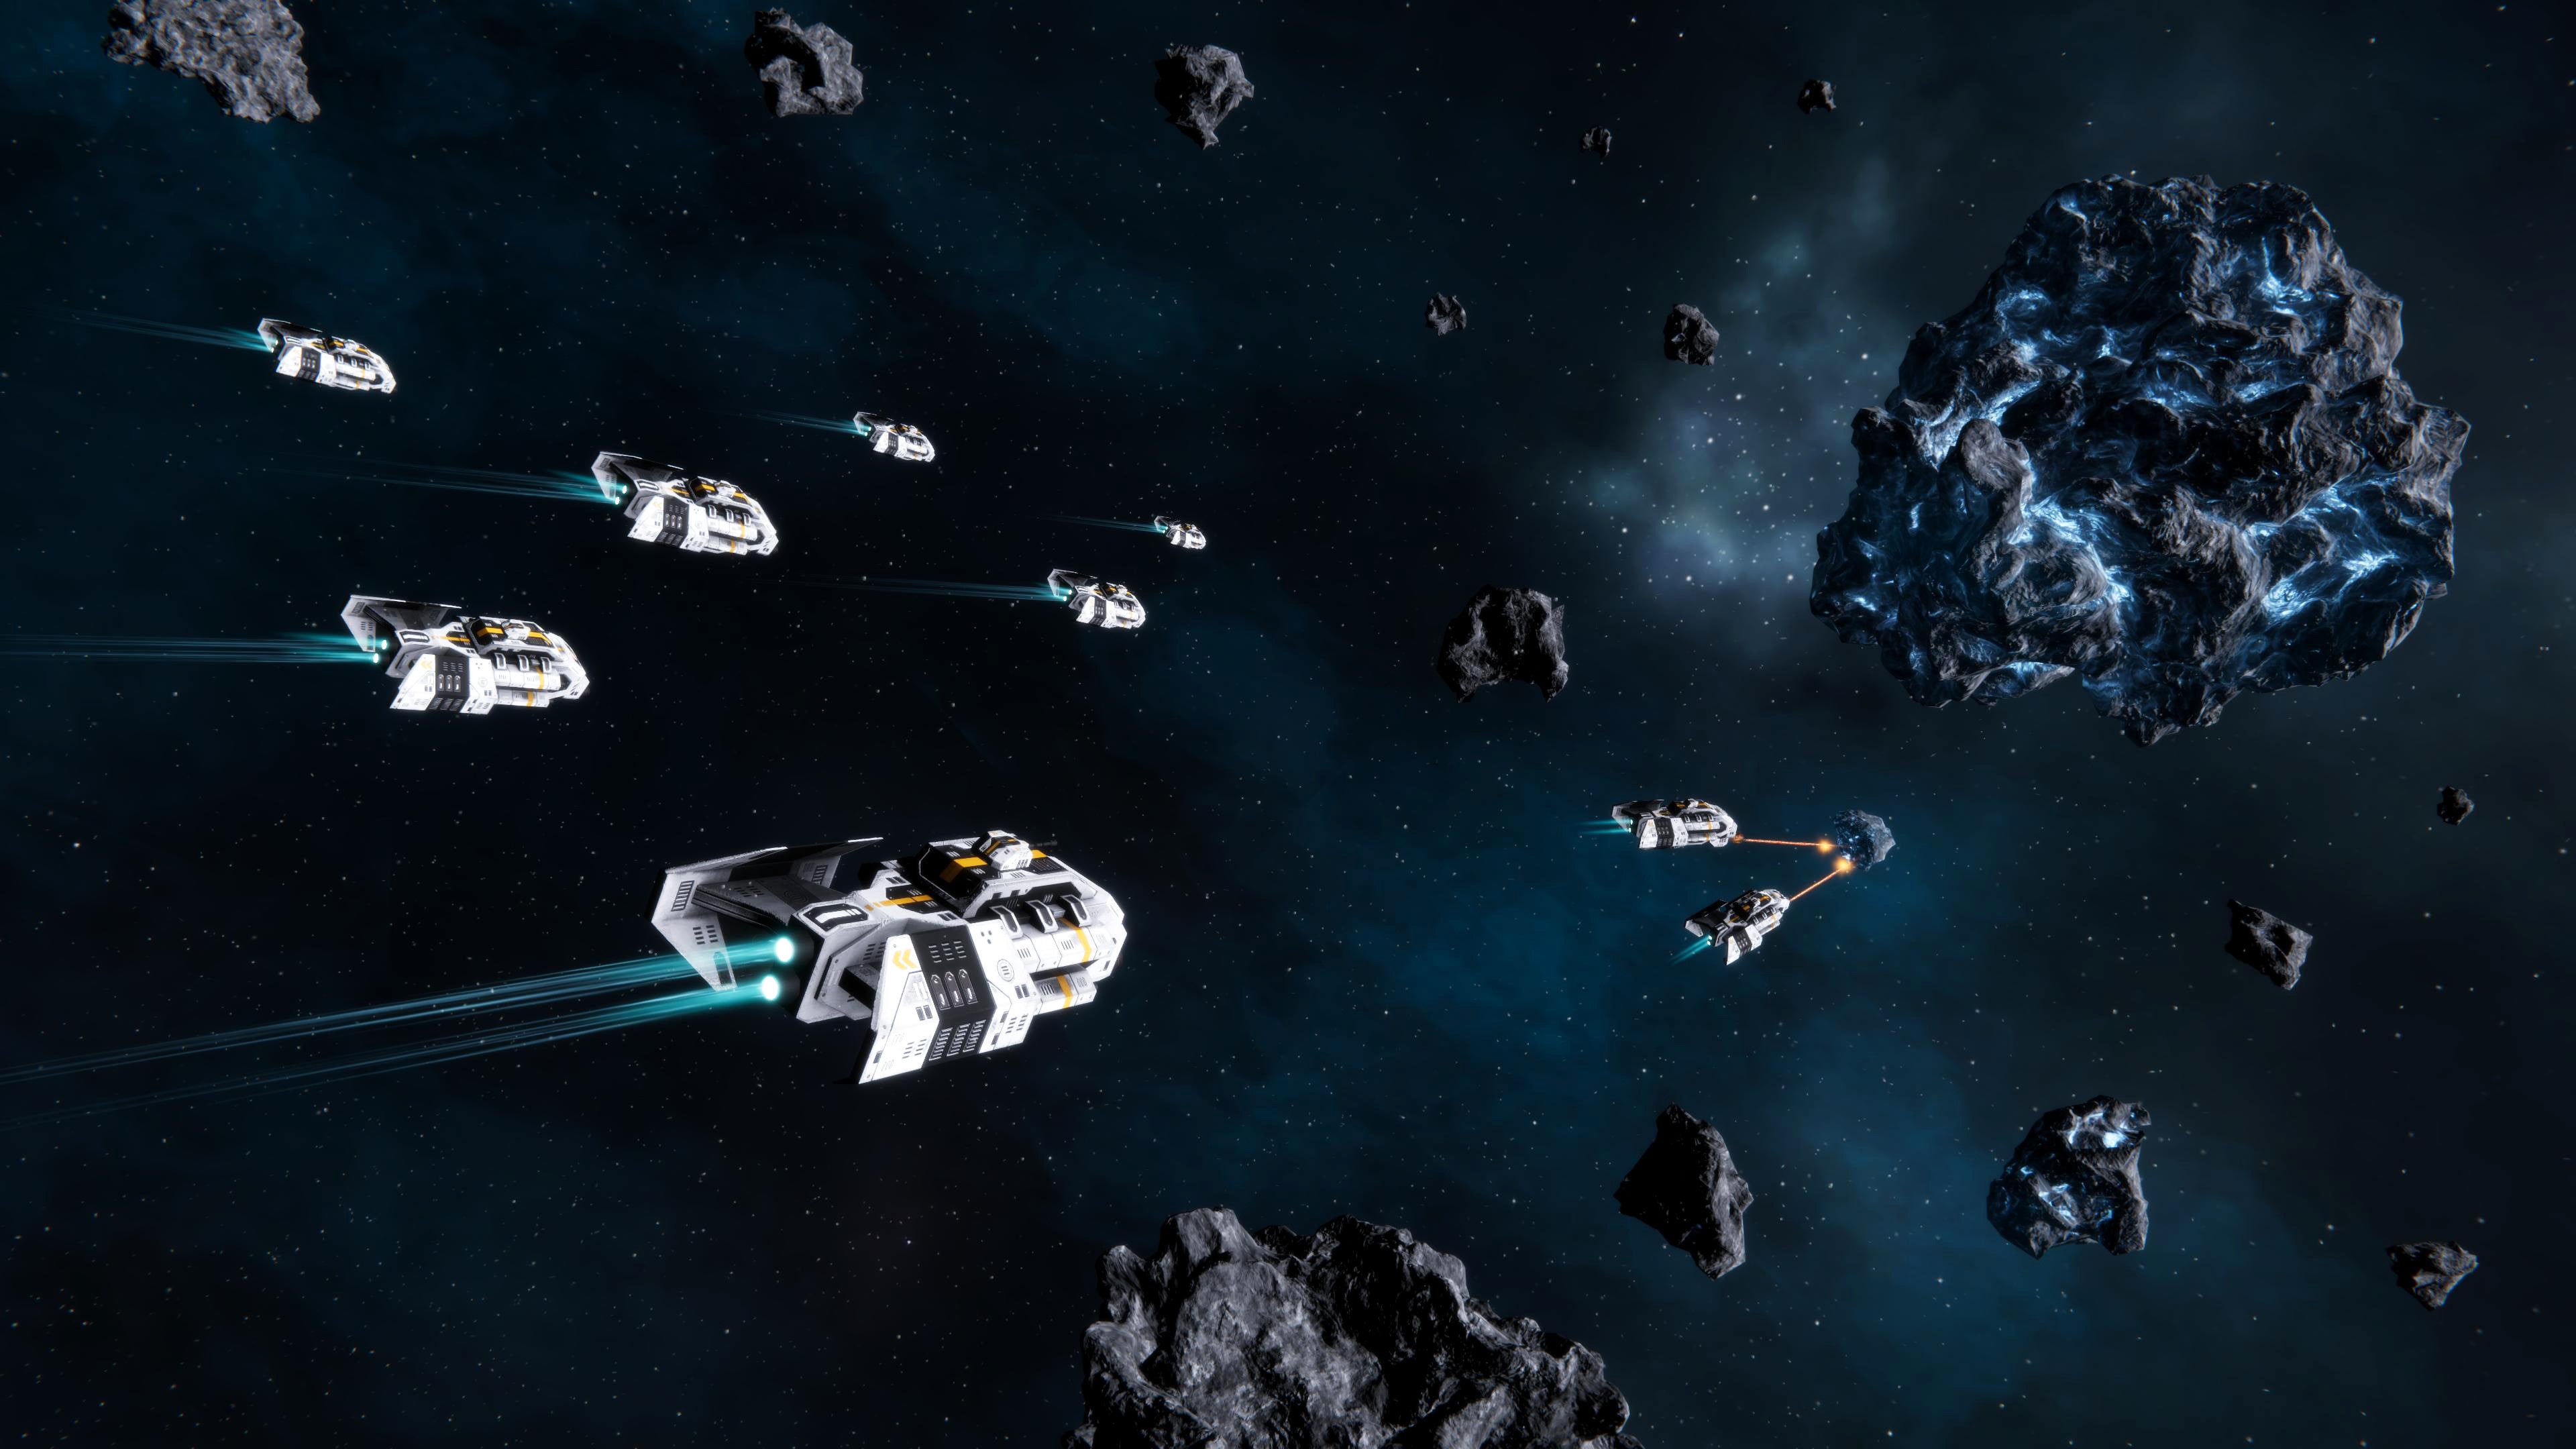 Star Exodus reminded me that I want a space RTS.